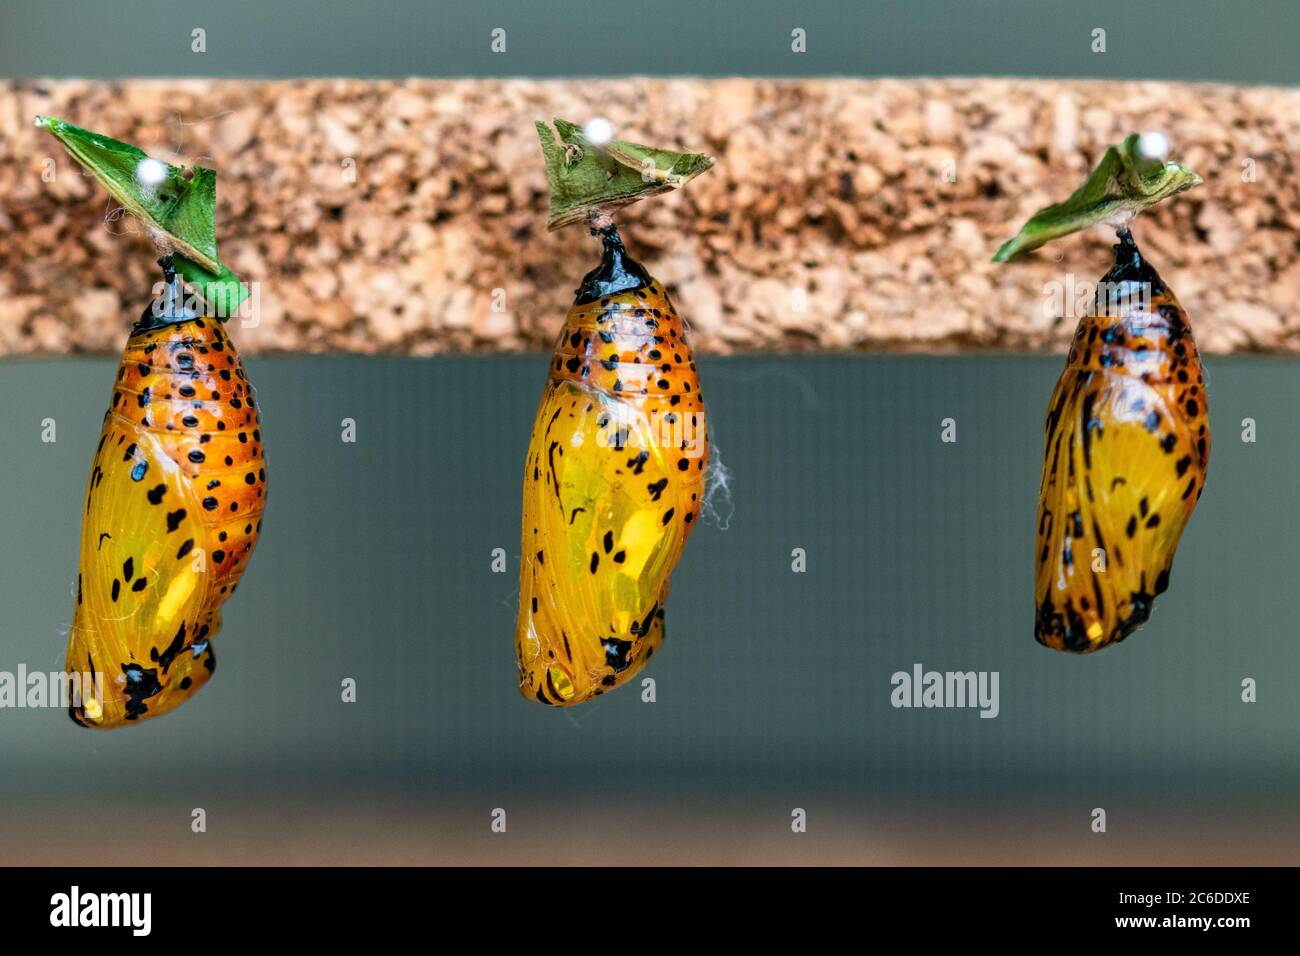 a close up image of three butterfly´s still in their yellow chrysalis forms changing from caterpillar Stock Photo